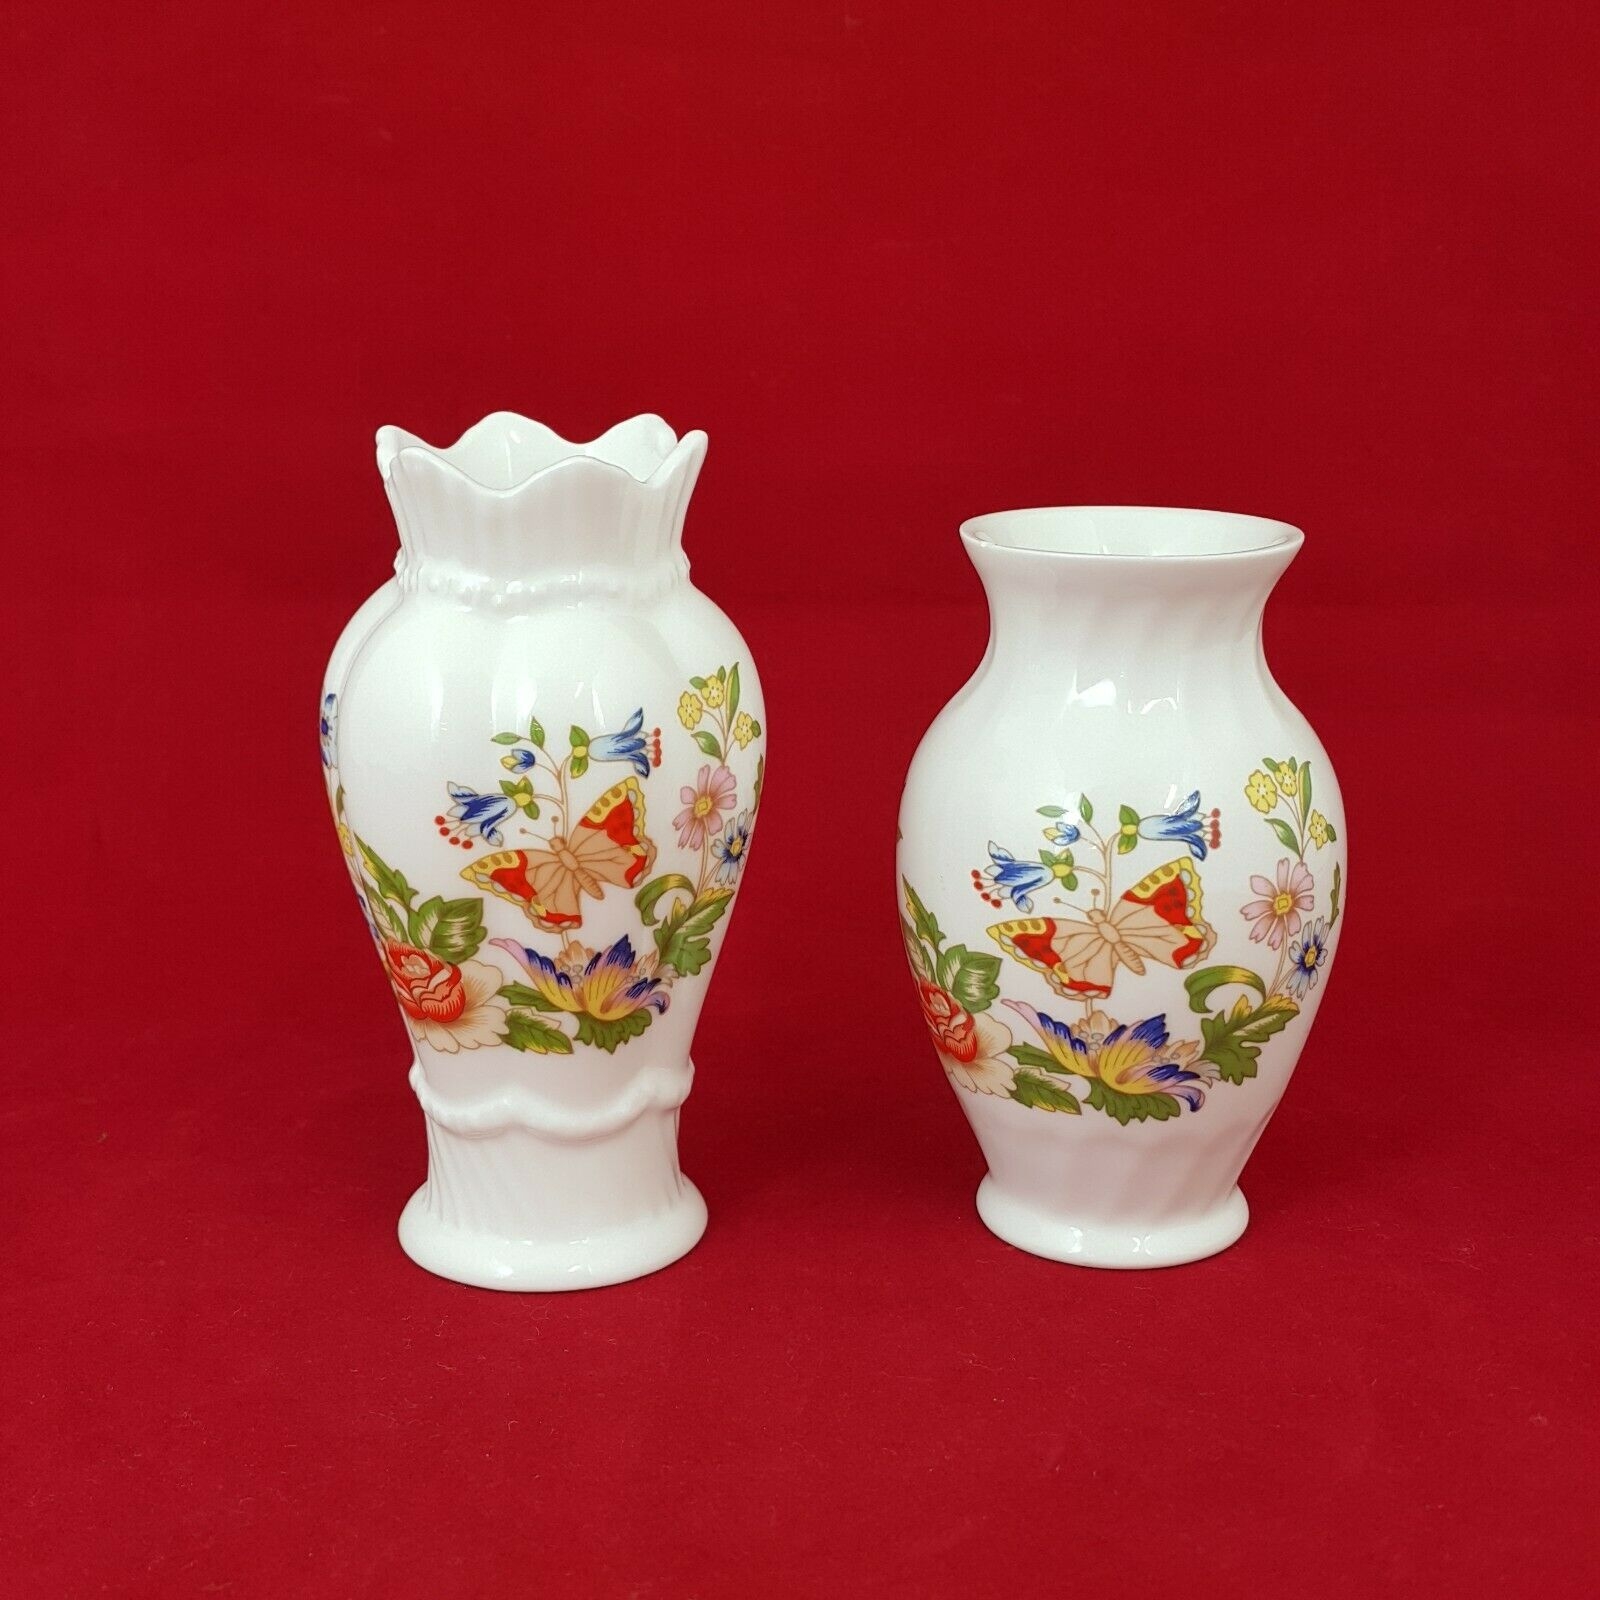 Aynsley Cottage Garden 2x Small Vase (1 has a small chip) – 5210 AY – Aynsley – Amazing Antiques